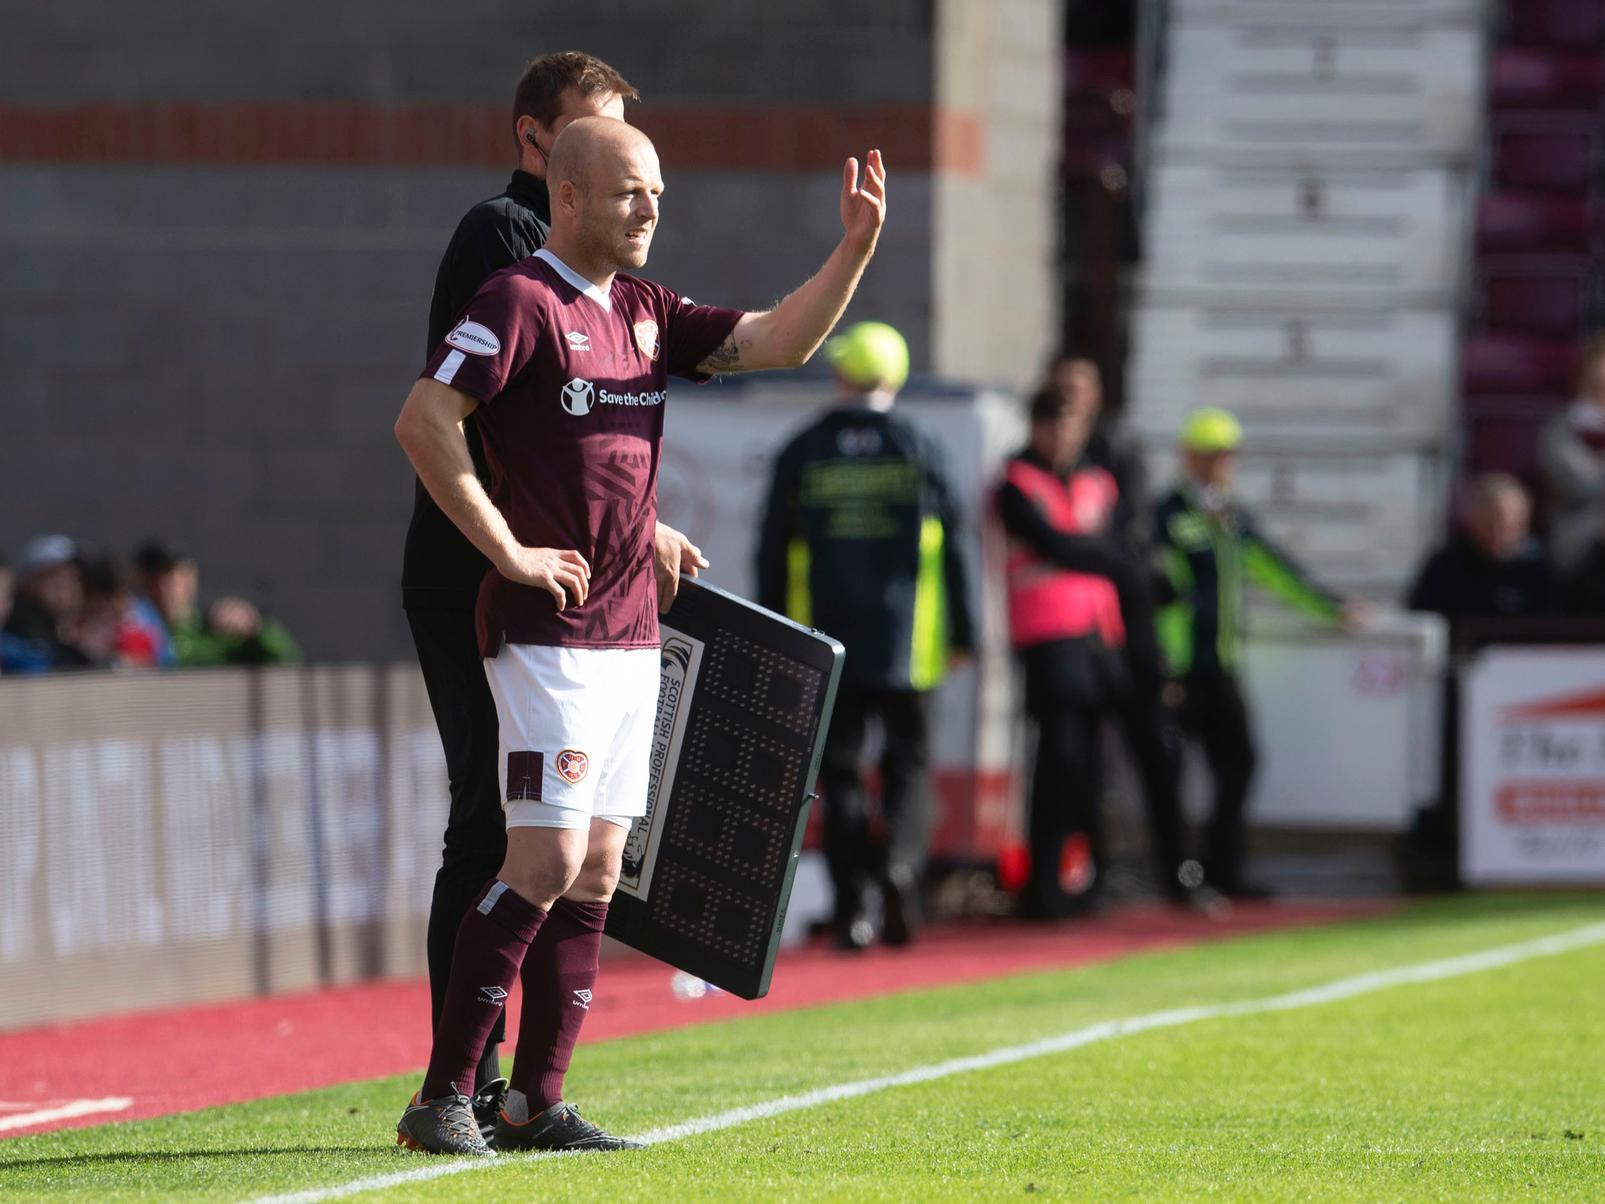 A forgettable day for Hearts talisman. Barked plenty orders but well shackled by Kilmarnocks defence and barely got a kick of note.